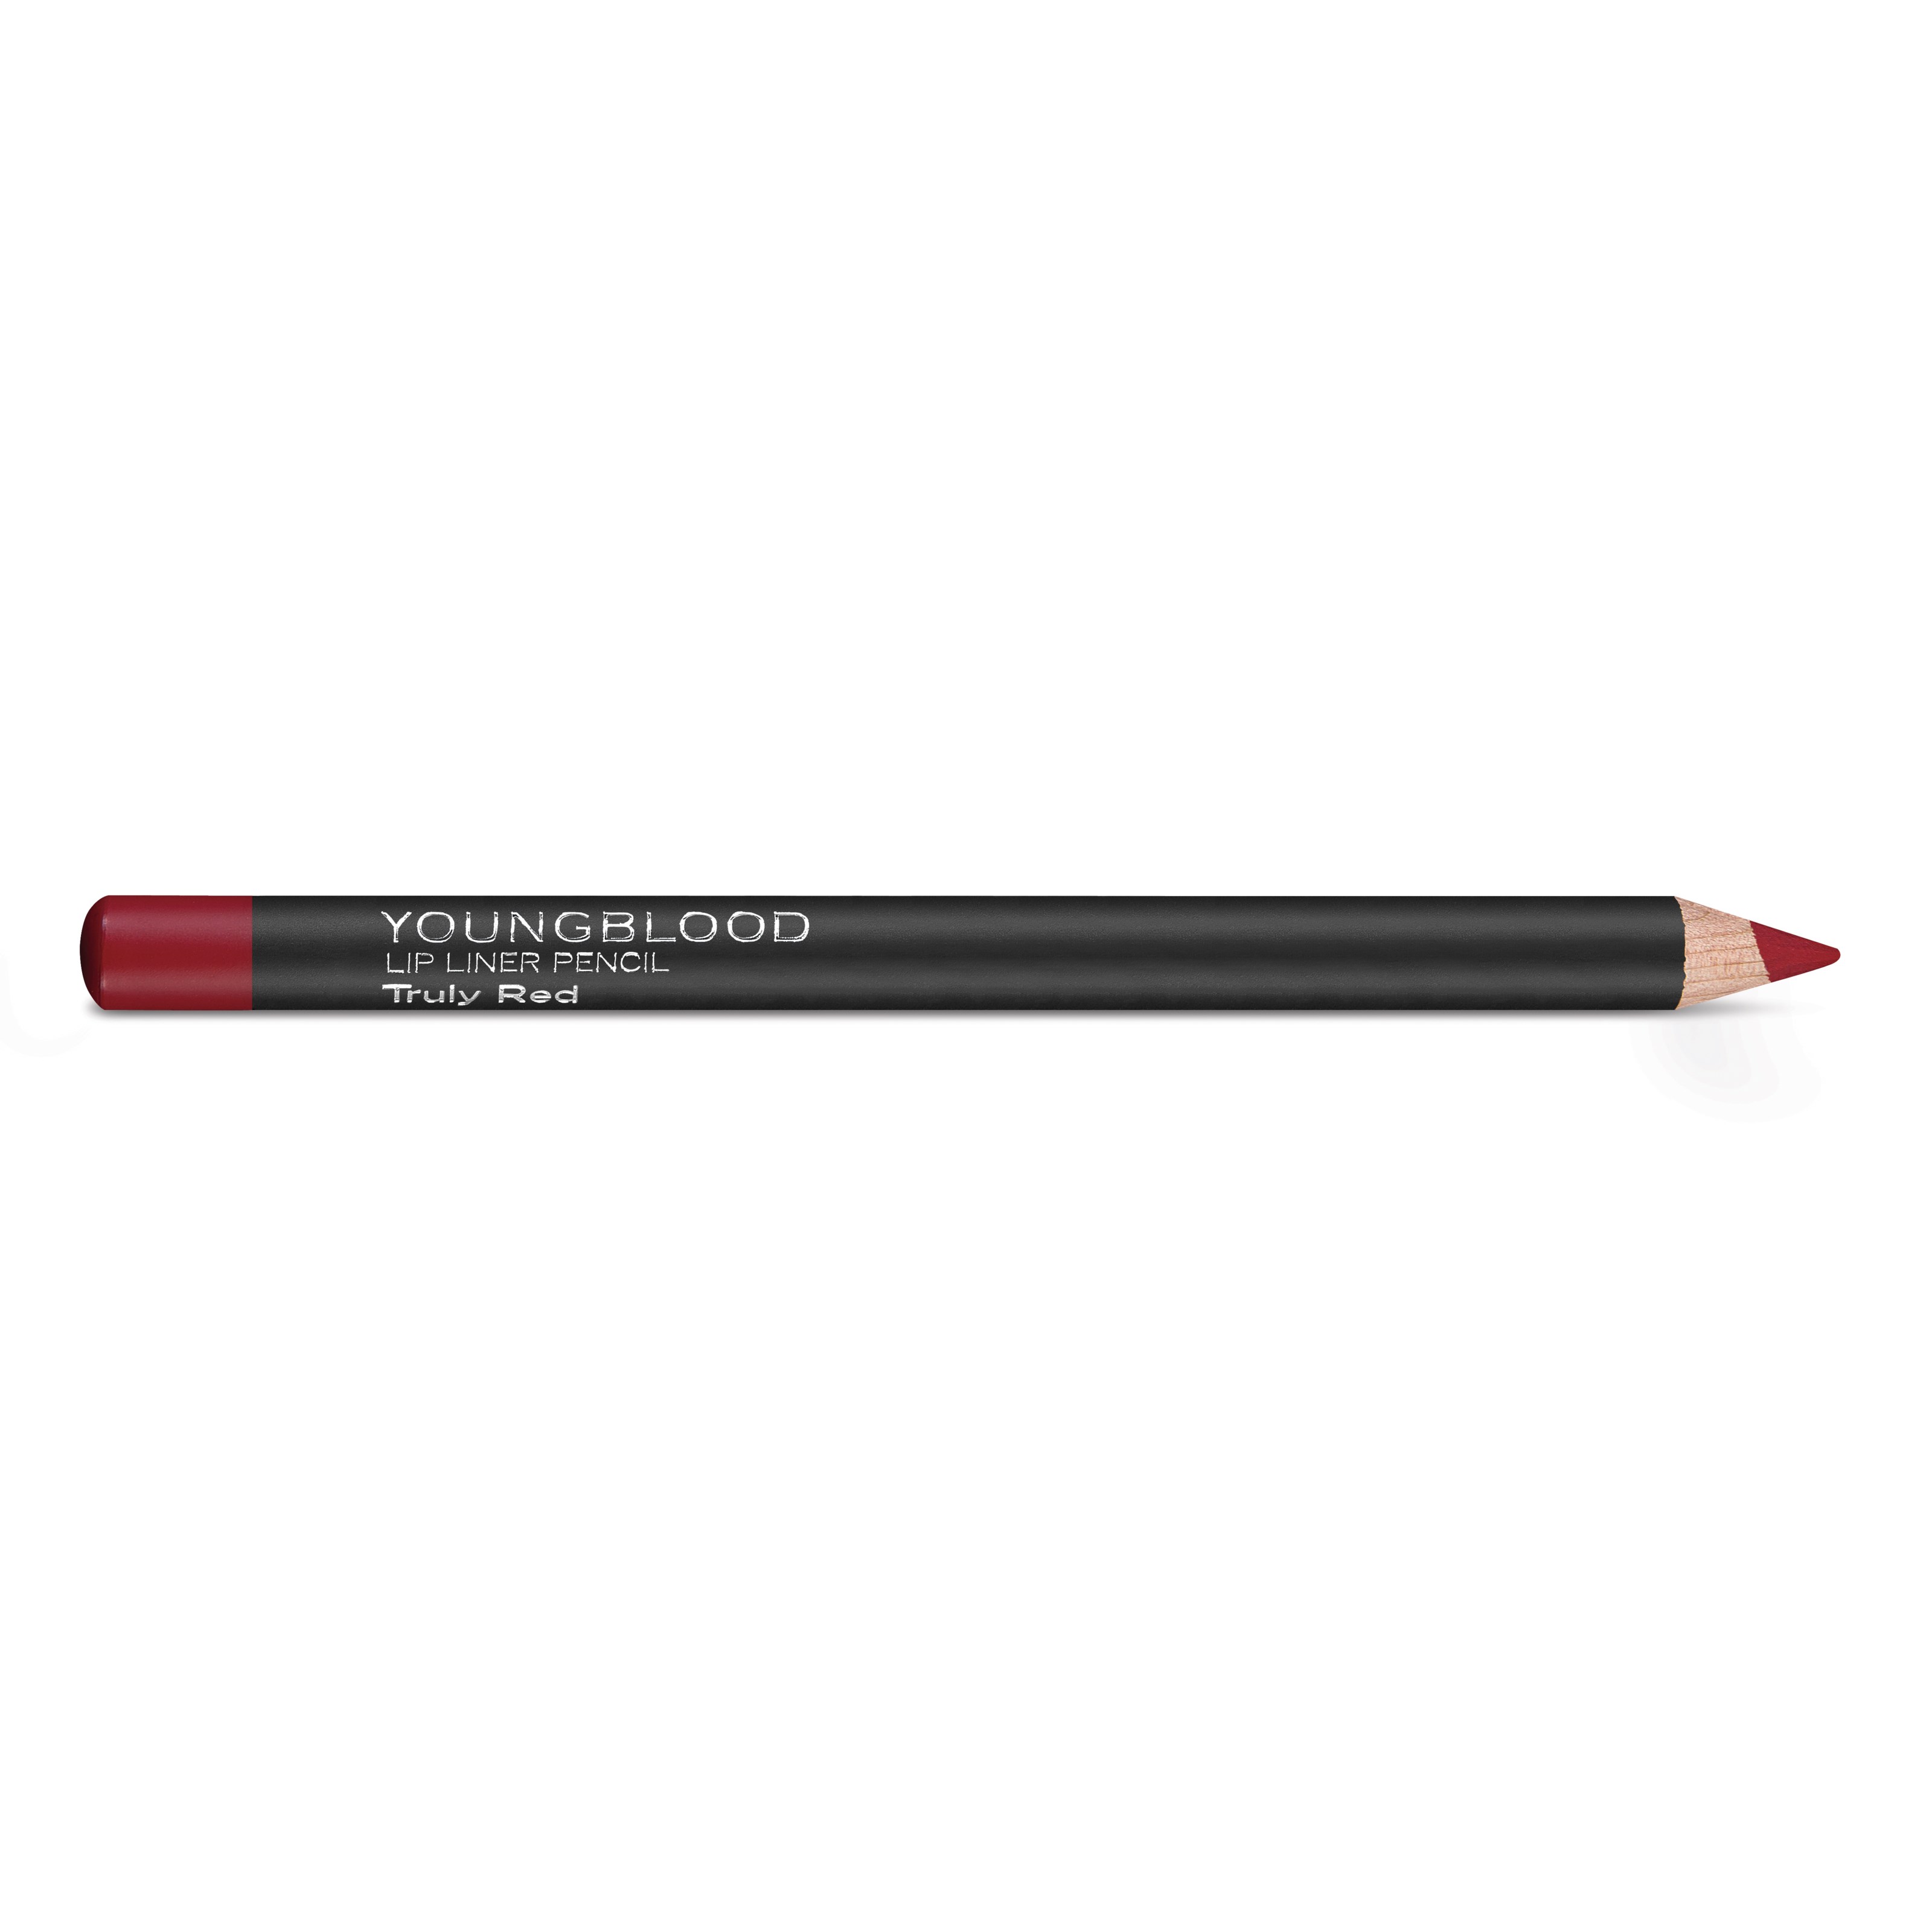 Youngblood Lip Liner Pencil 08 Truly Red